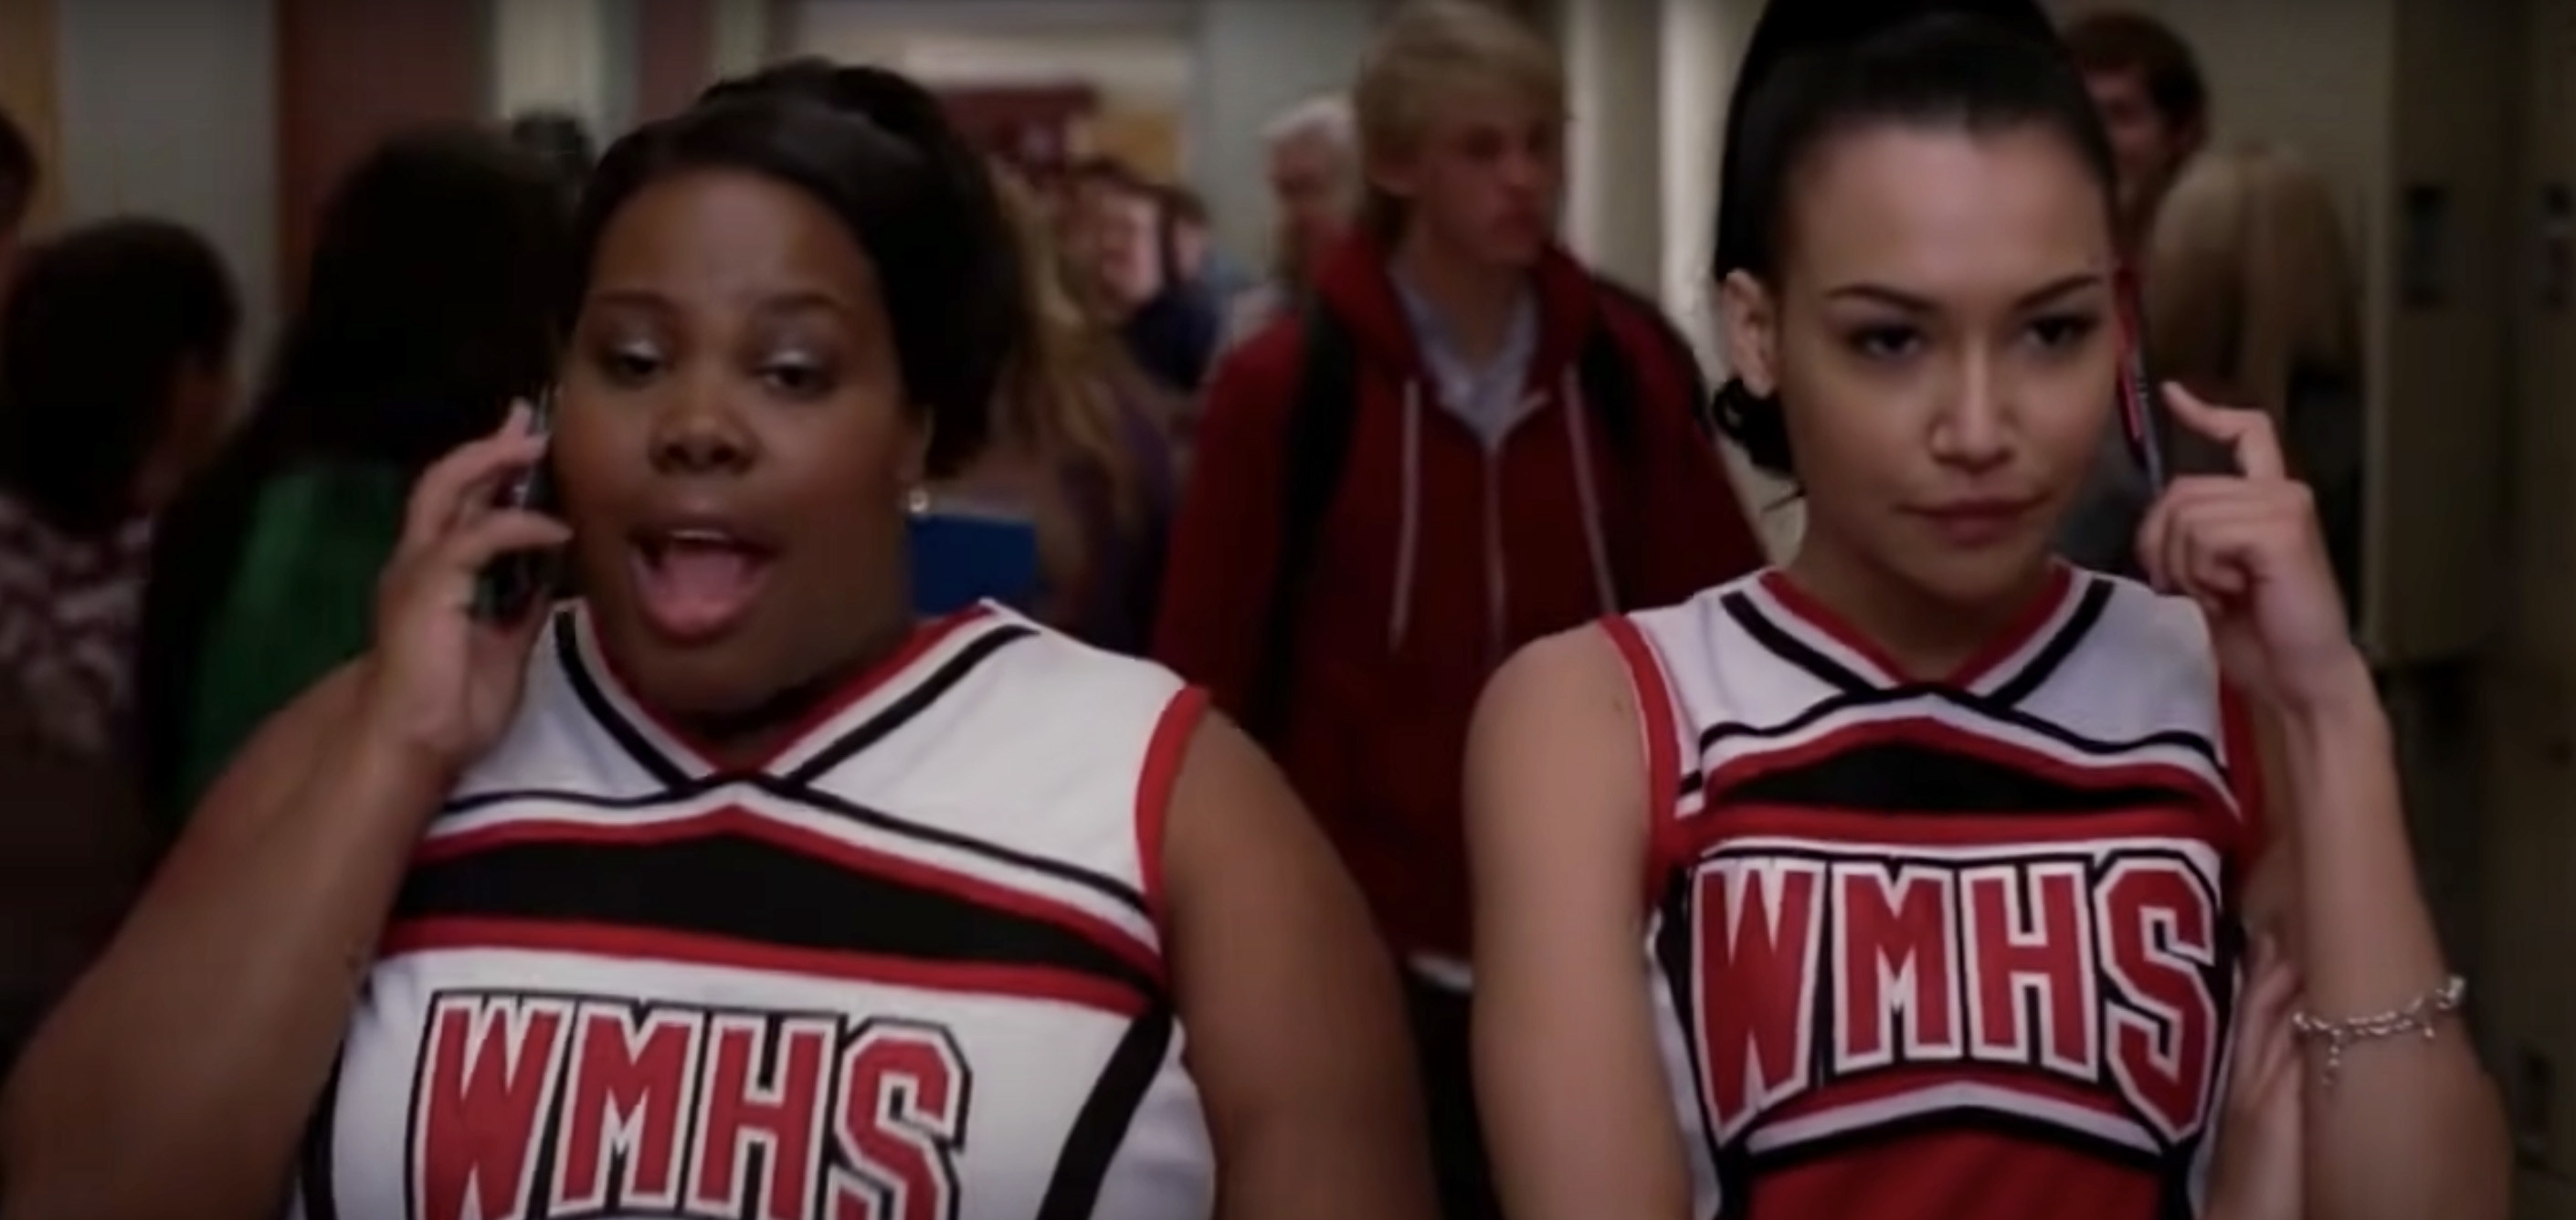 Mercedes and Santana singing in the hallway